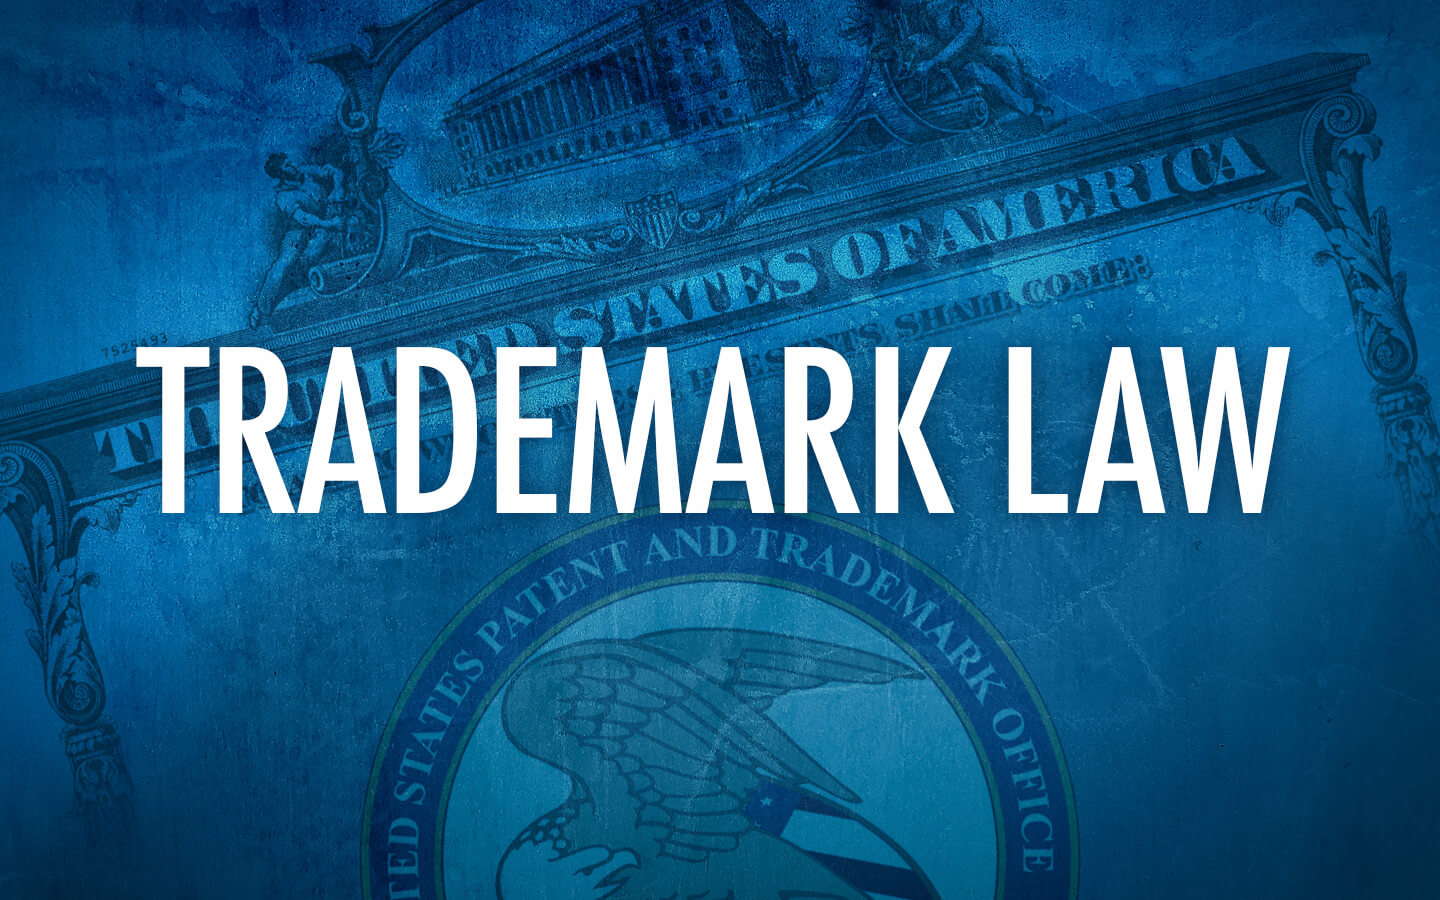 Seal of the United States Patent and Trademark Office logo in a blue background from Melvin K. Silverman Law Office